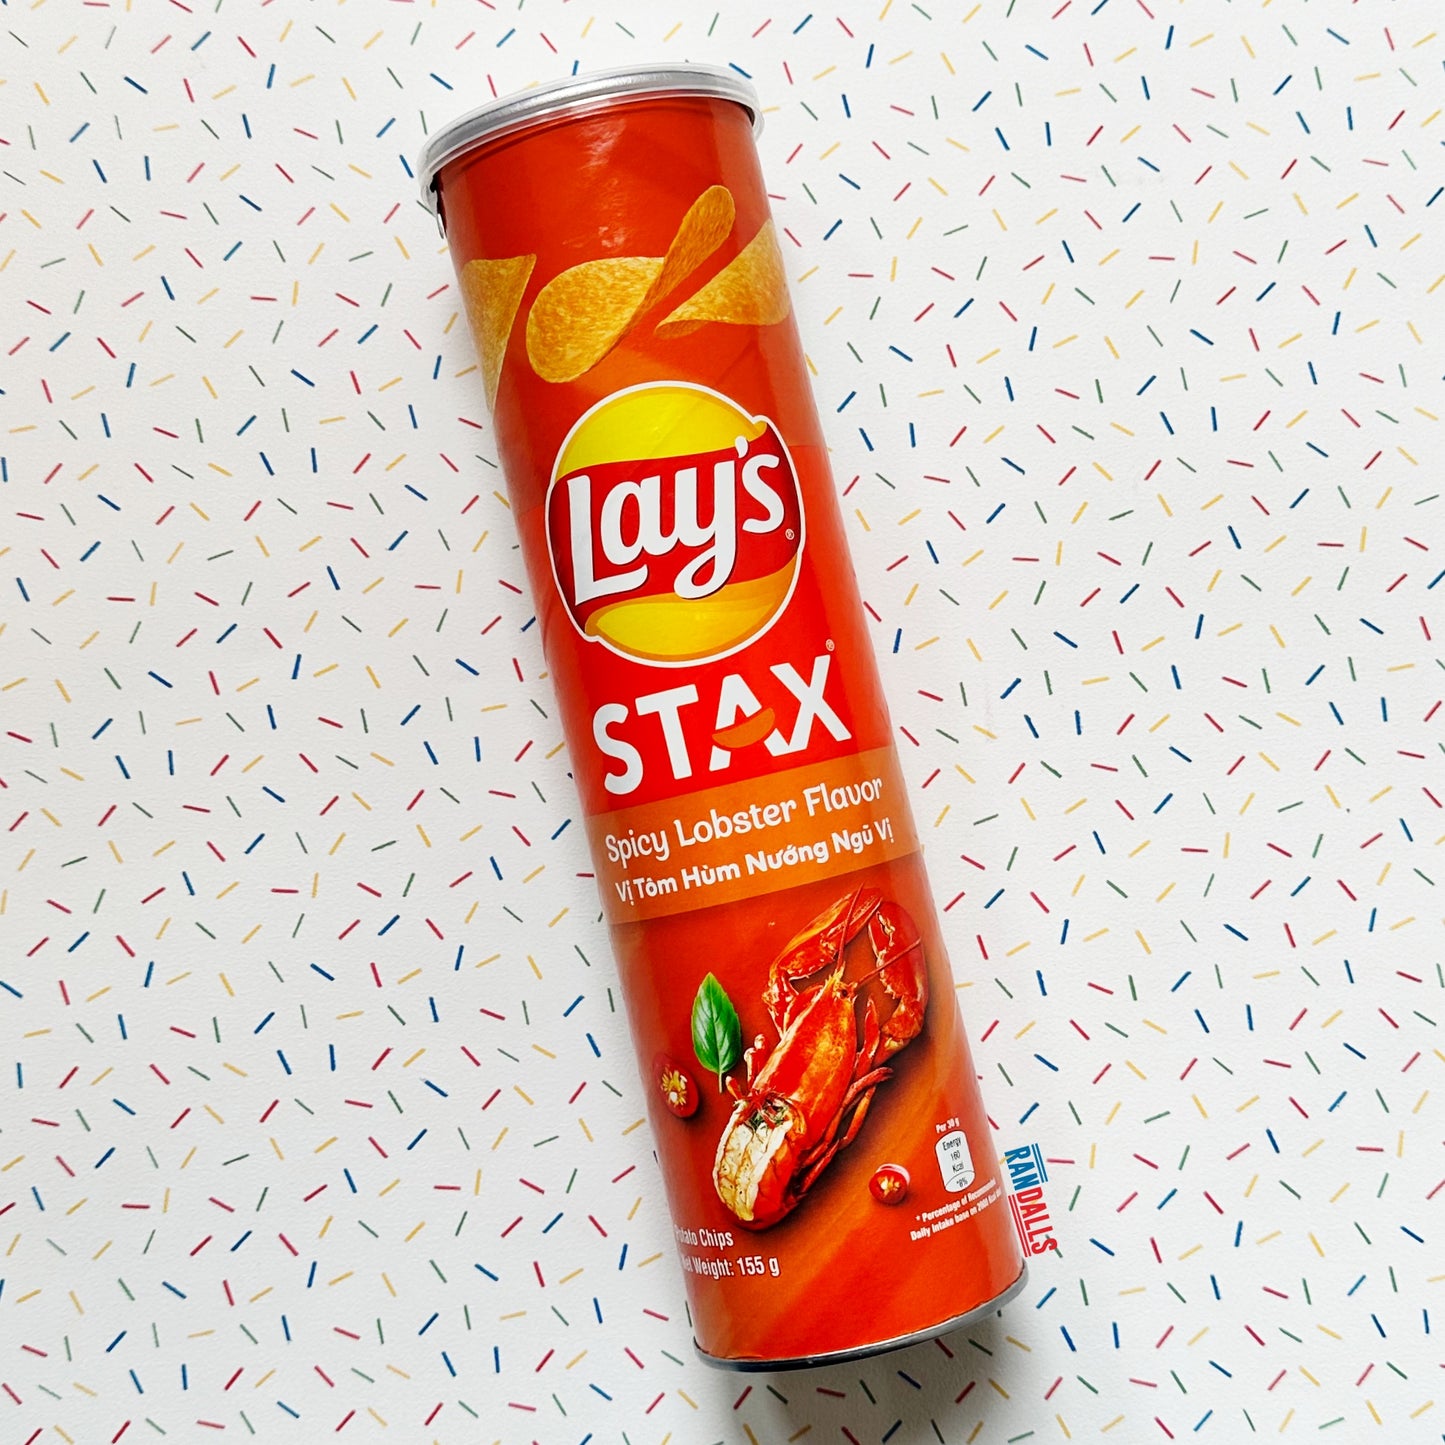 lays, lays stax, lays stax spicy lobster, spicy lobster, lays chips, thailand, randalls, randallsuk